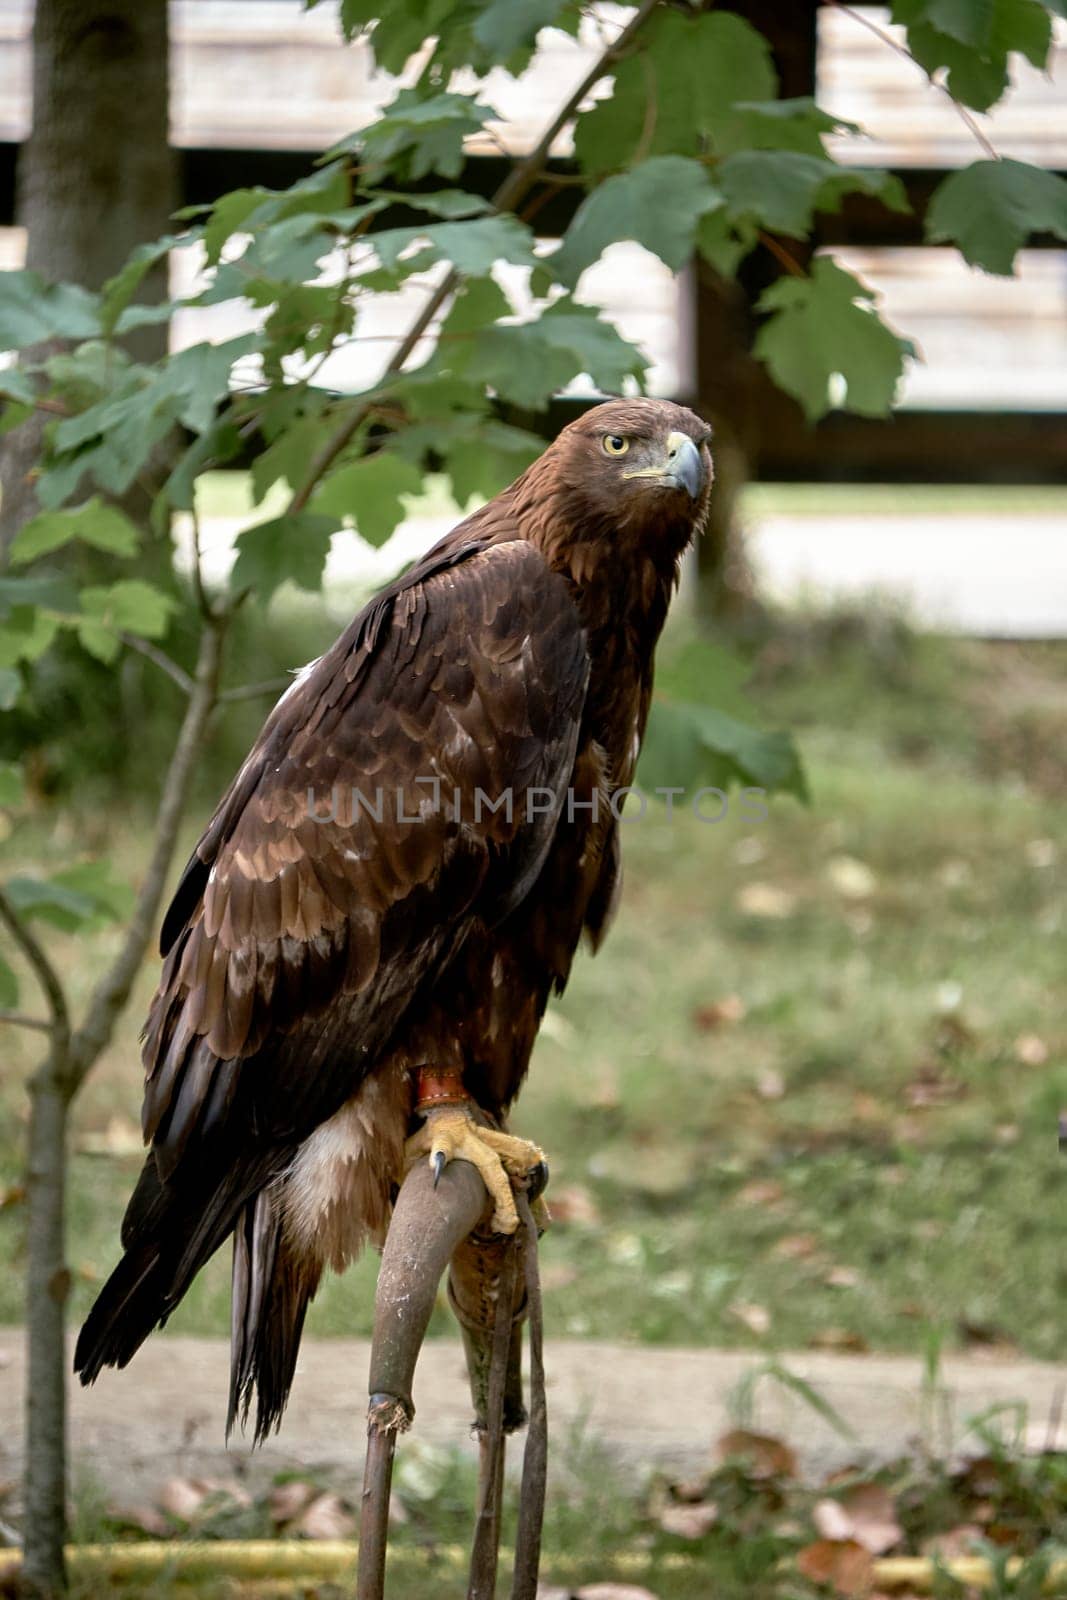 Golden eagle perched on a pole. Aquila chrysaetos. Prisoner, bound, background out of focus, resting,